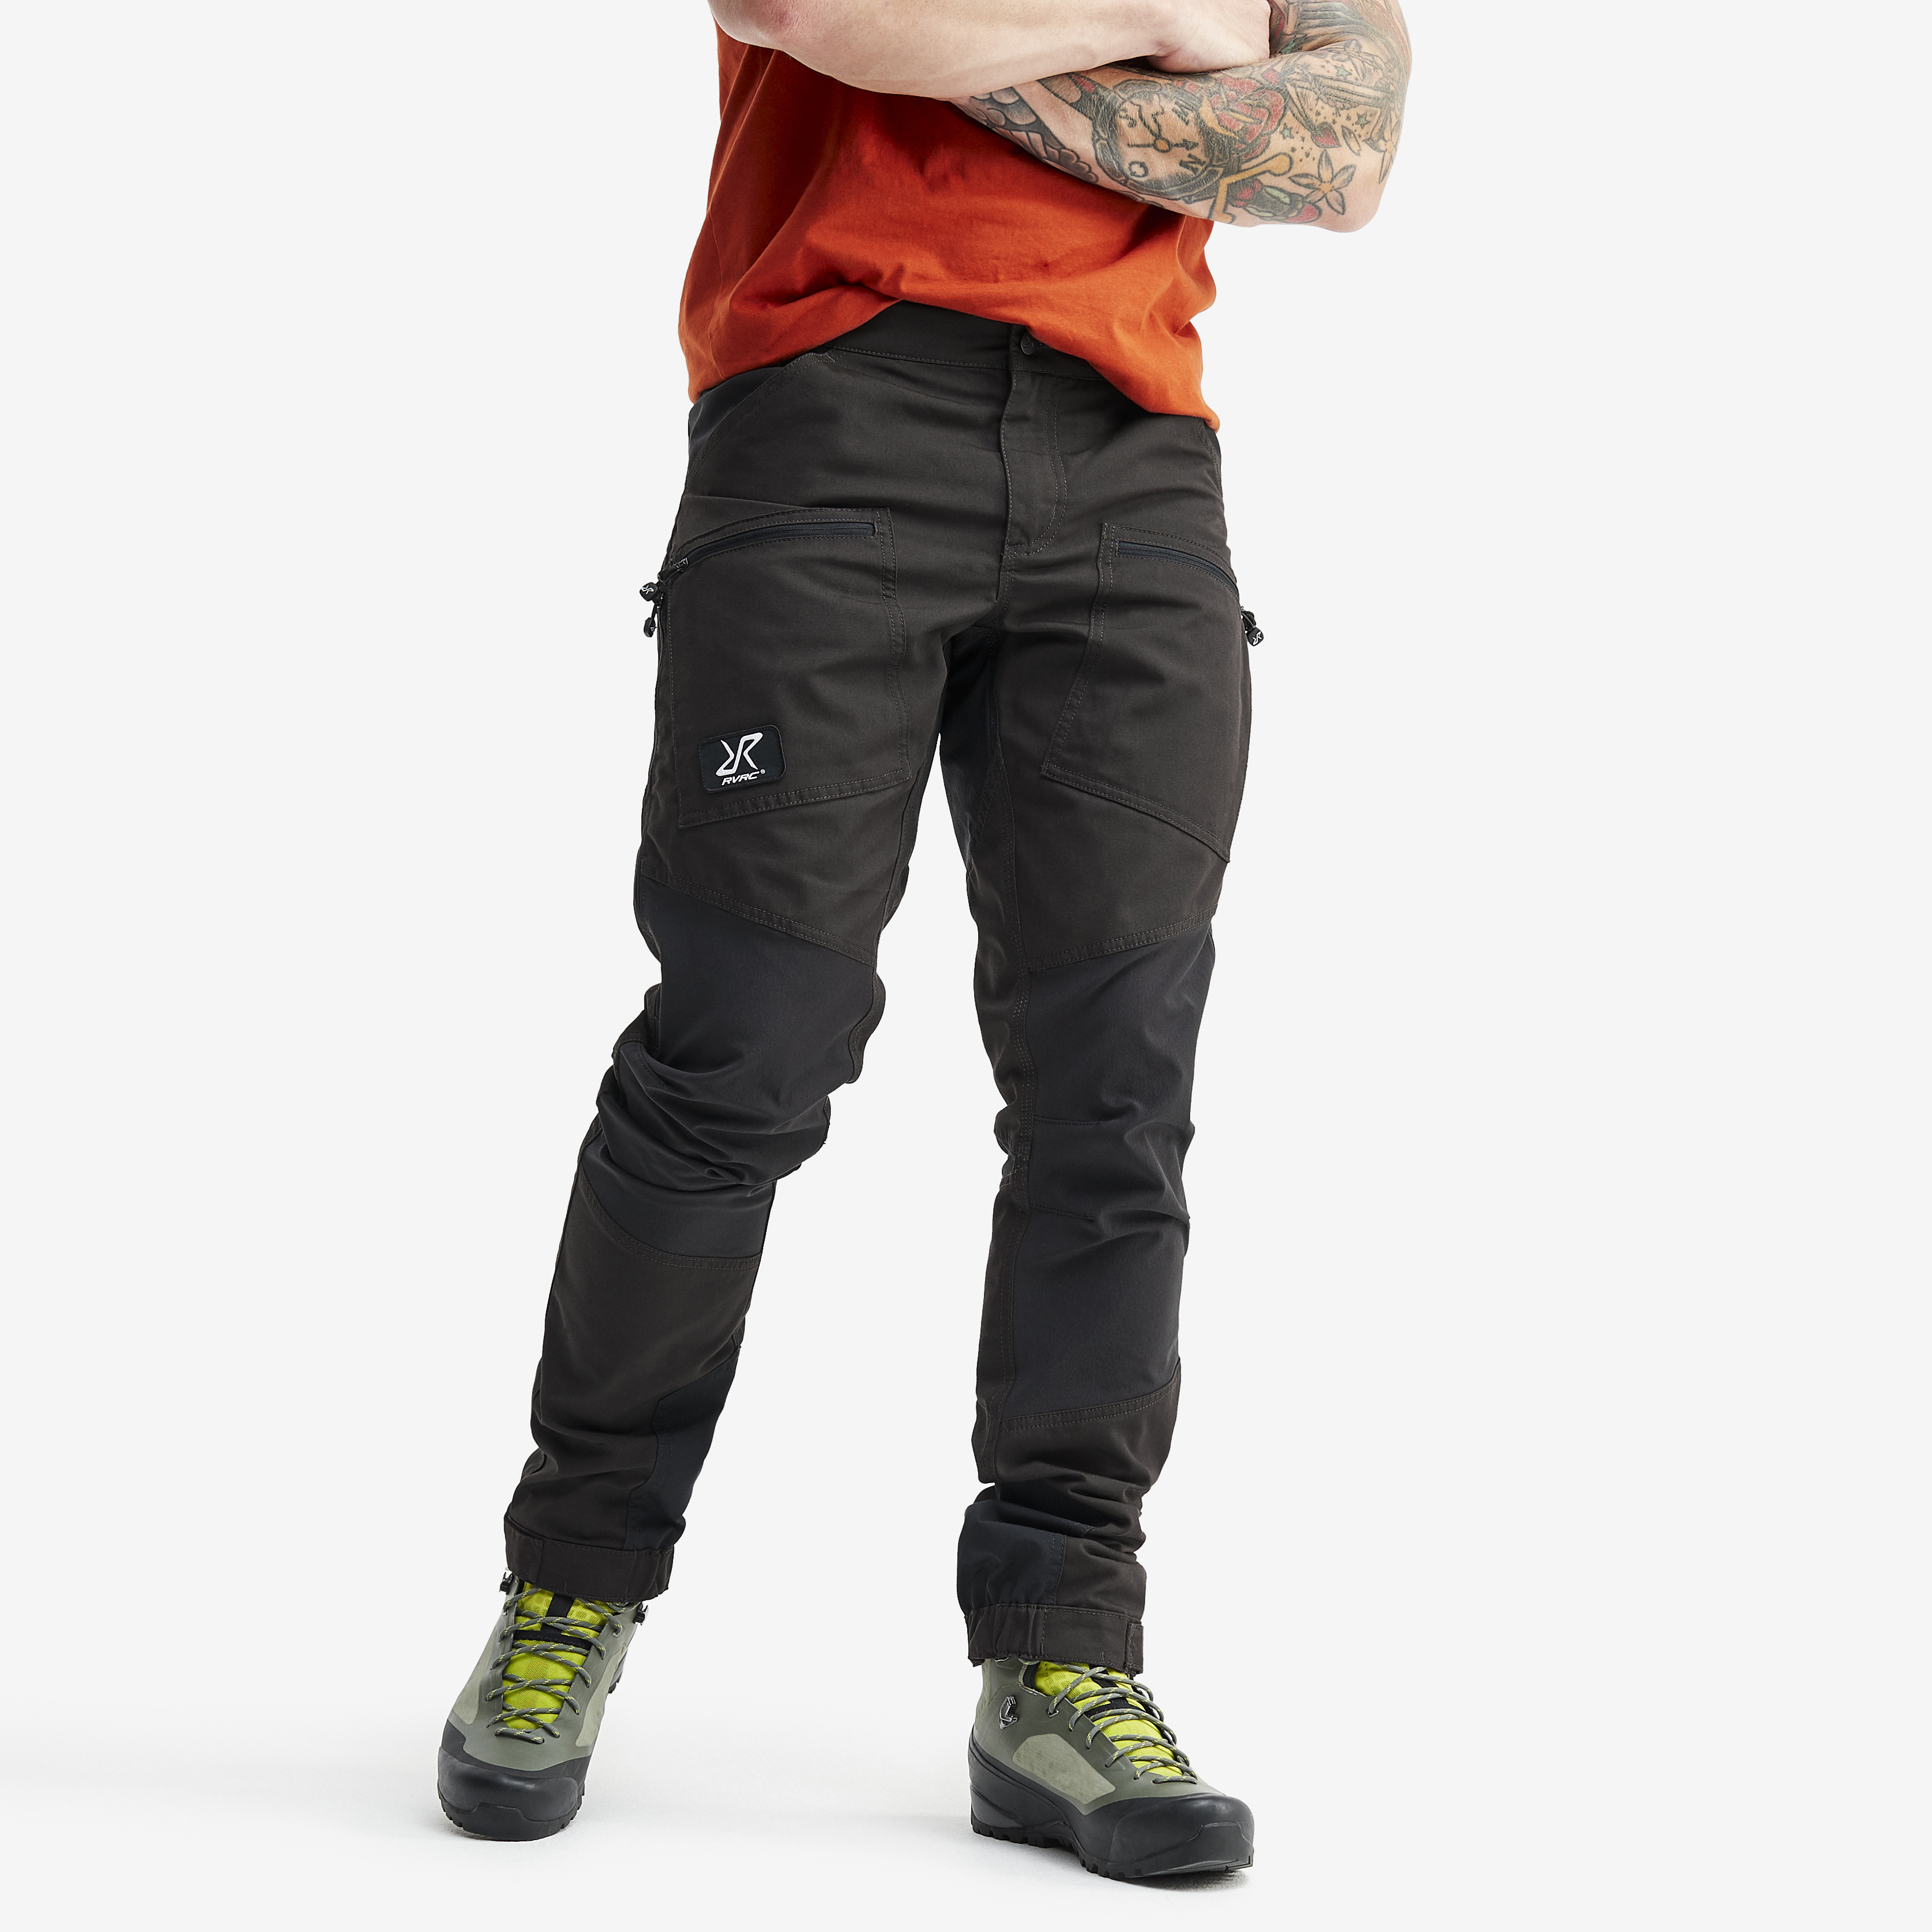 Nordwand Pro hiking pants for men in black